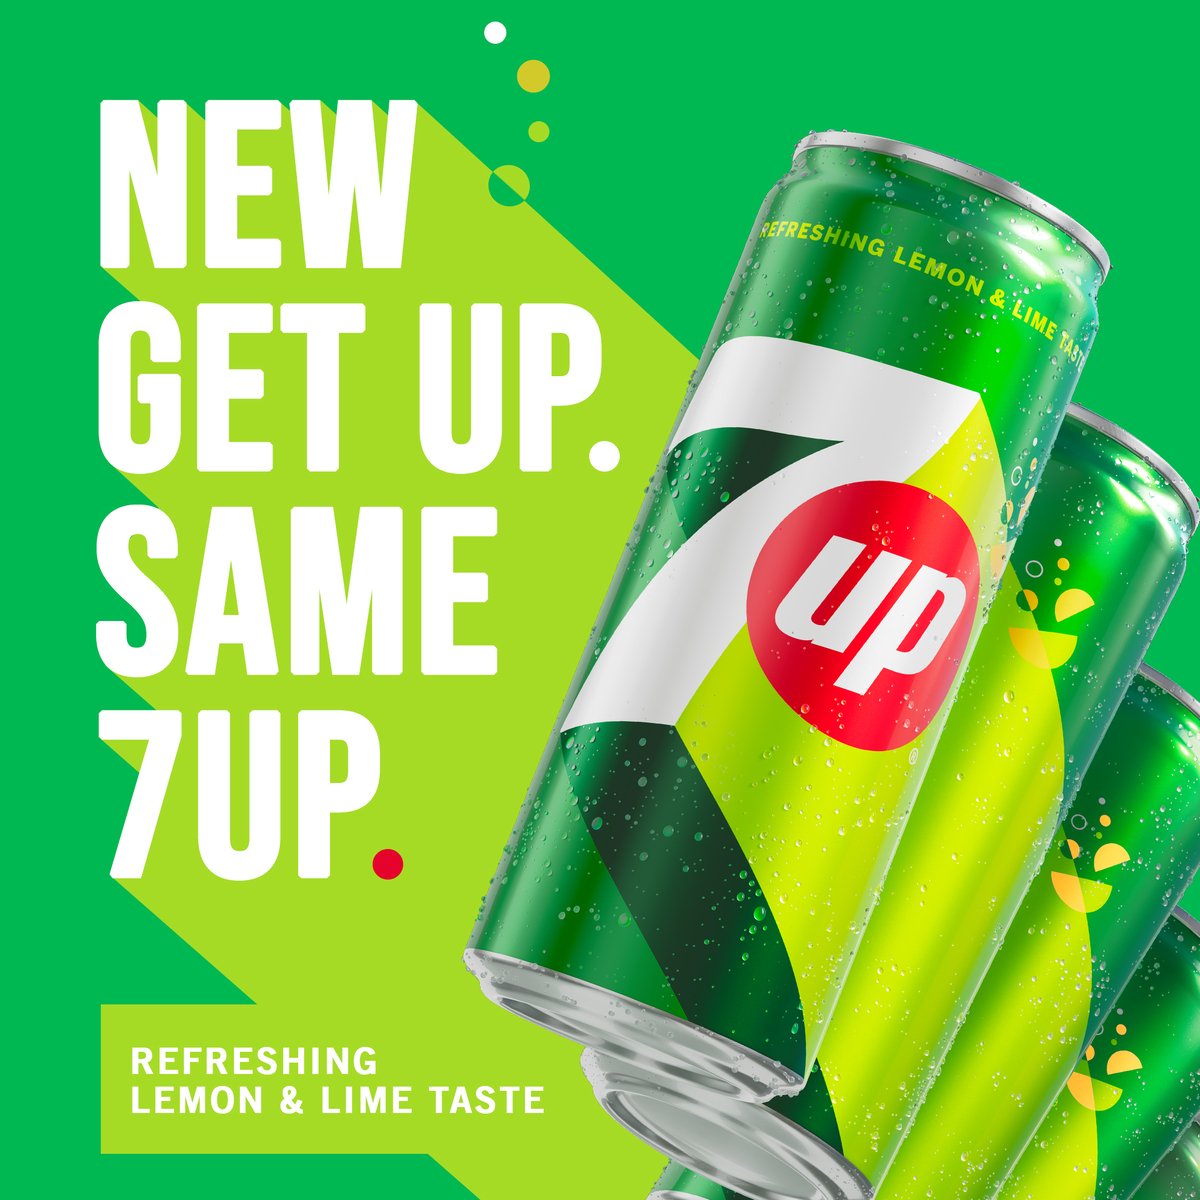 7UP Carbonated Soft Drink Cans 330 ml